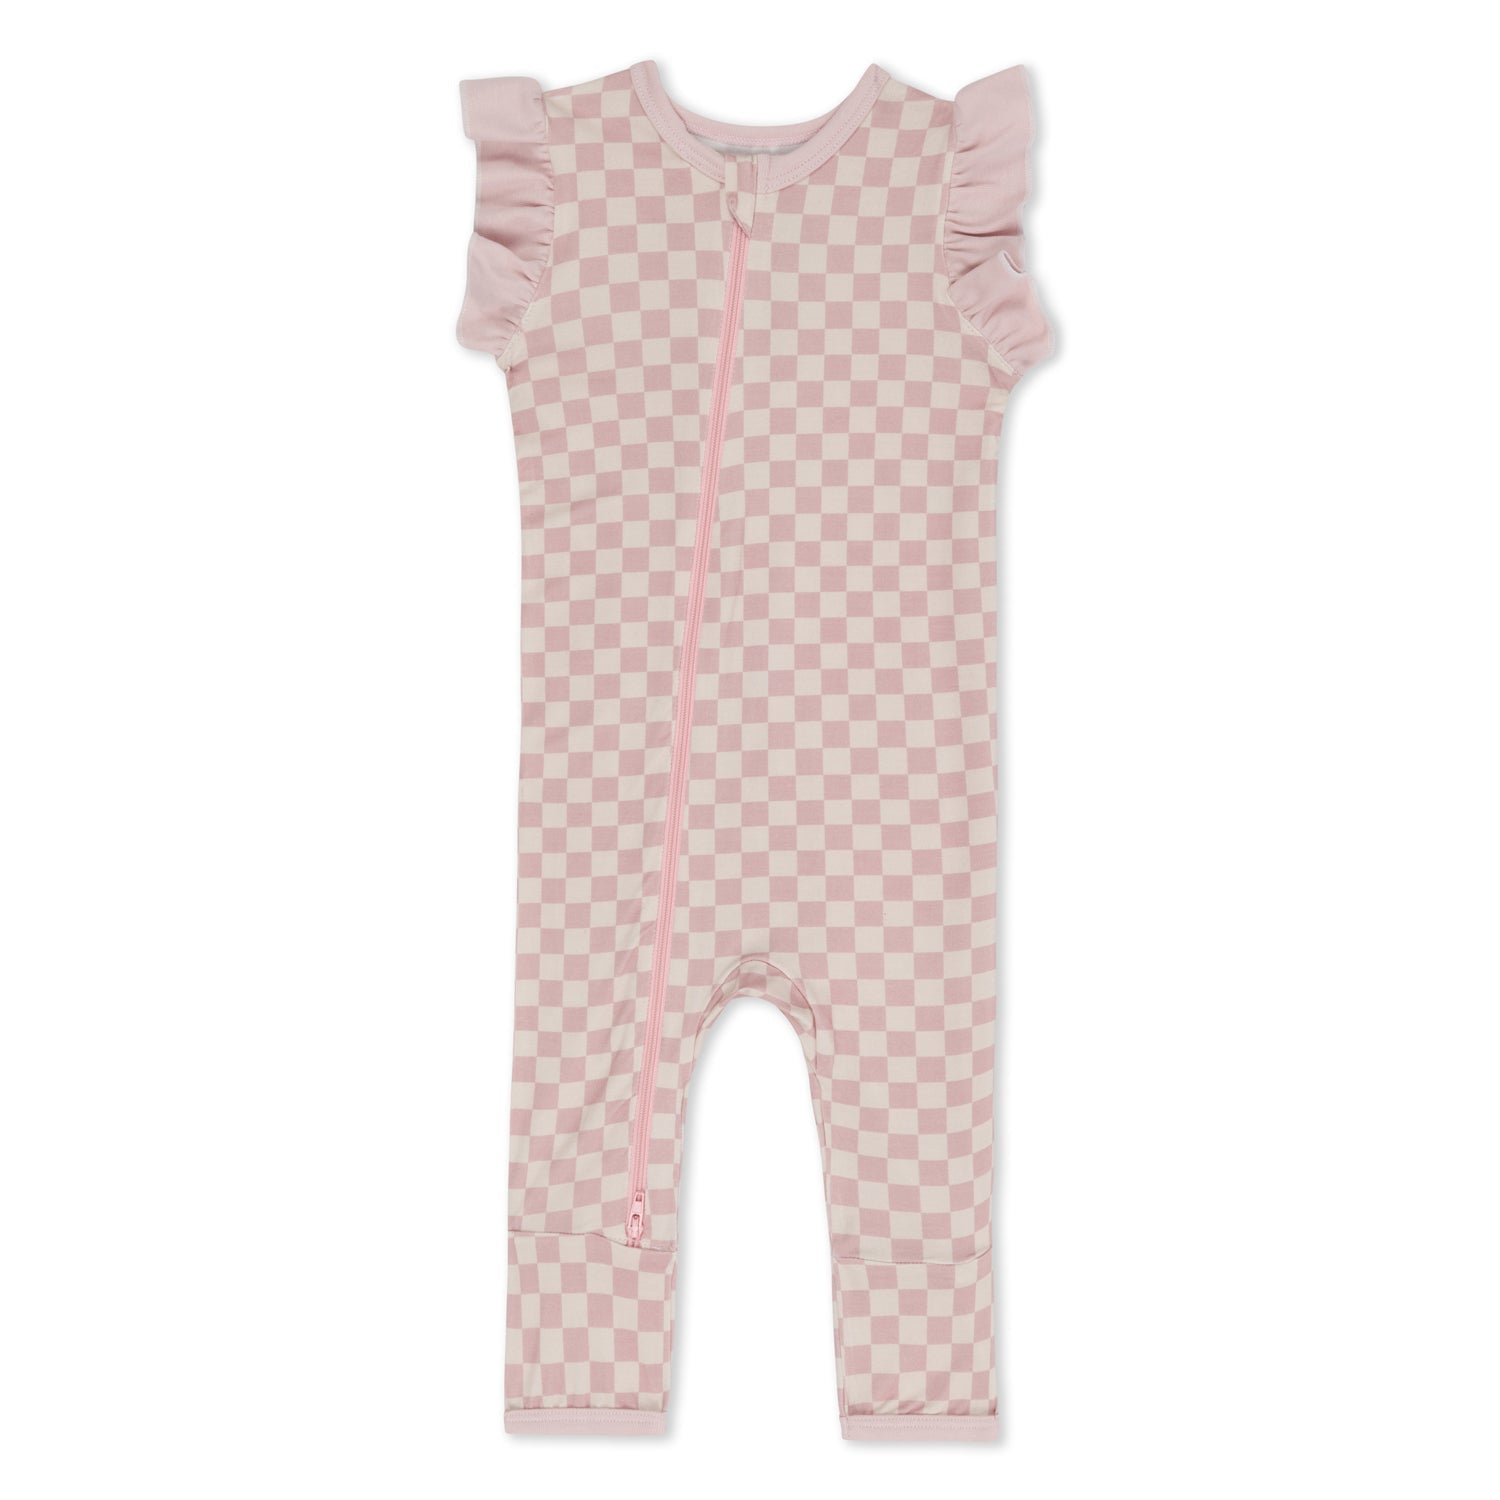 Checkers in Pink Romper